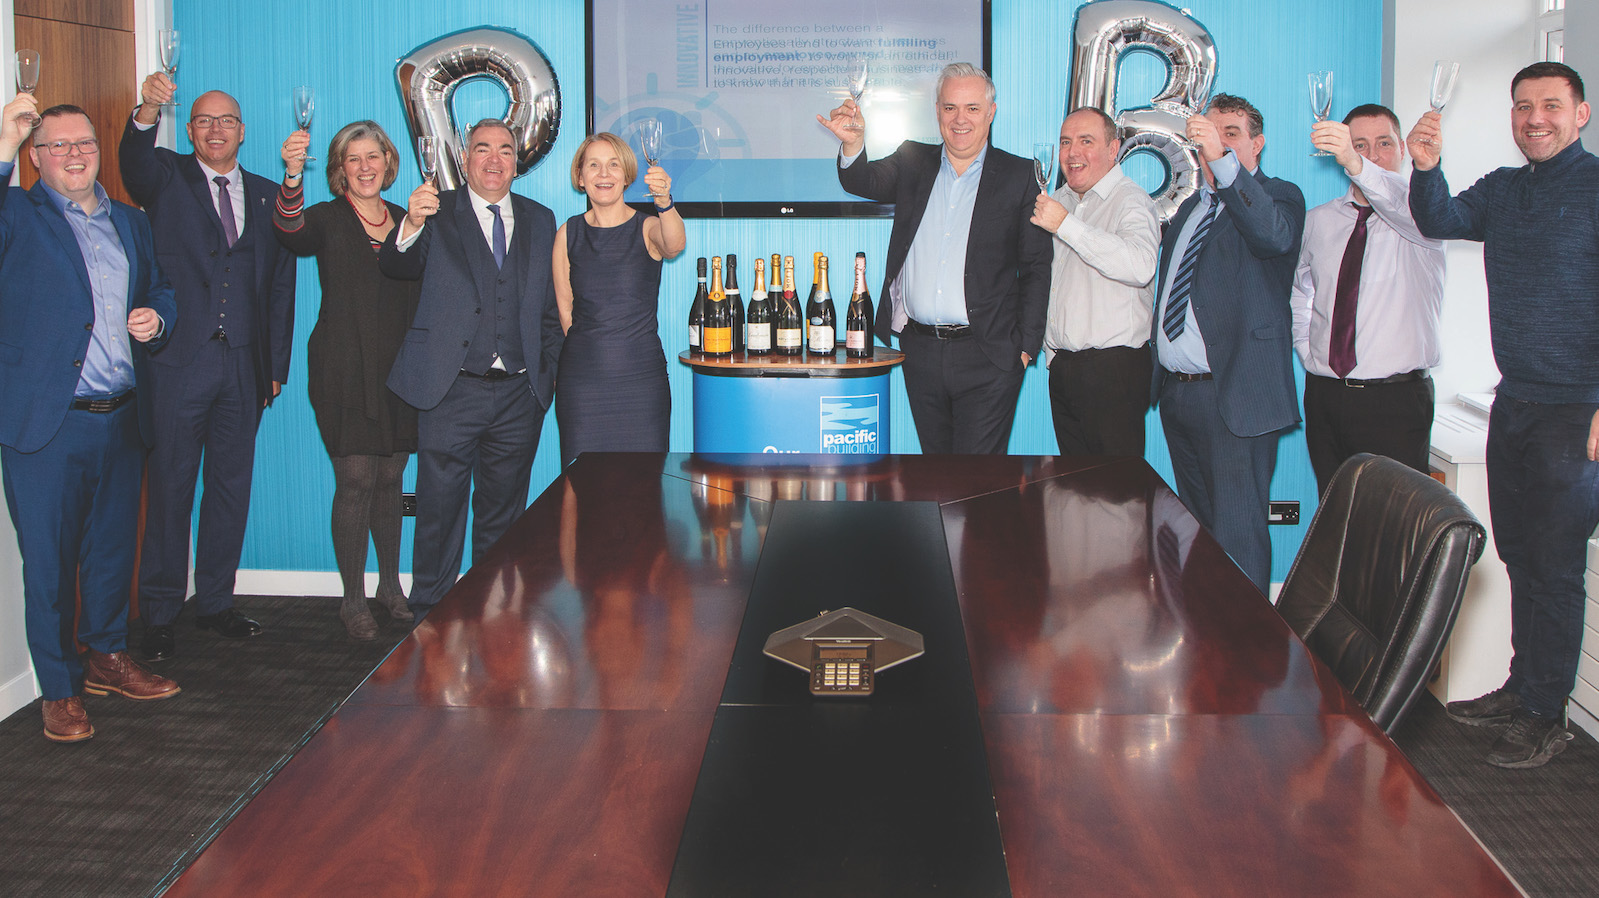 Pacific Building celebrates its move to employee ownership in 2019